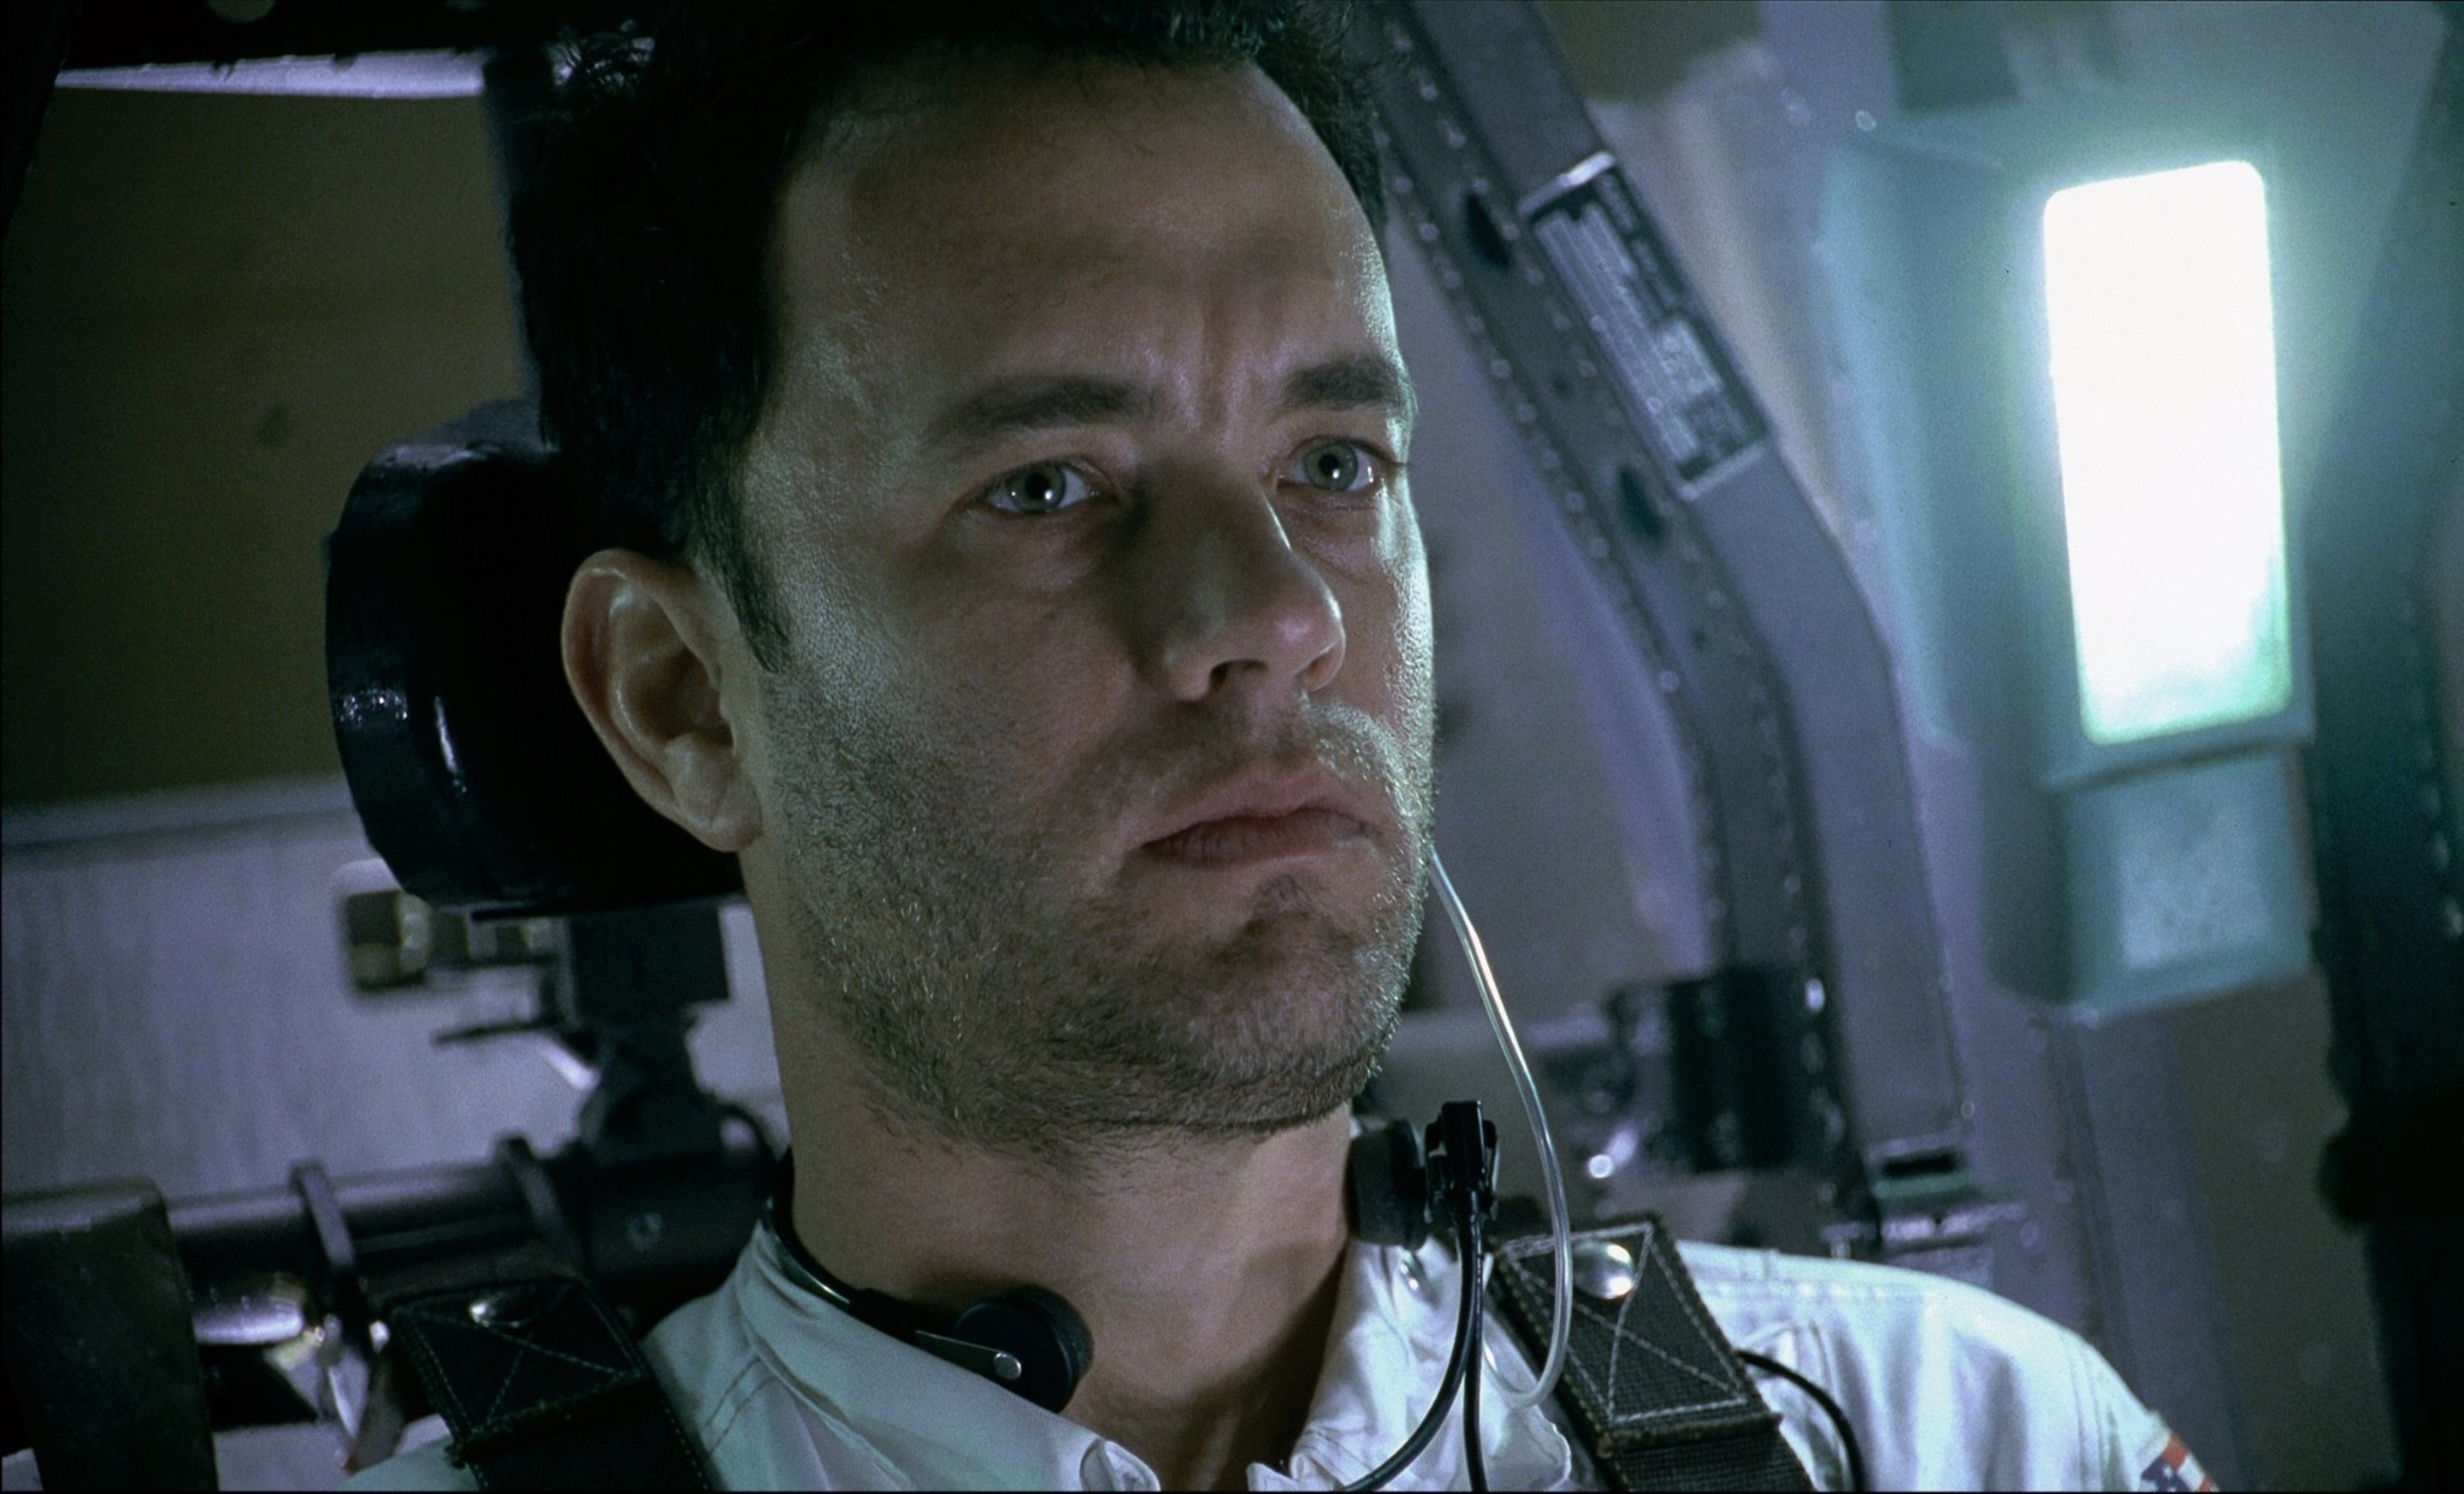 <p>Hanks, who had just won two Best Actor Oscars in a row, is a big fan of space exploration and makes total sense for the role of Lovell. However, he wasn’t the first choice either. Reportedly John Travolta was offered the role, but turned it down.</p><p>You may also like: <a href='https://www.yardbarker.com/entertainment/articles/20_facts_you_might_not_know_about_alien/s1__35329229'>20 facts you might not know about 'Alien'</a></p>